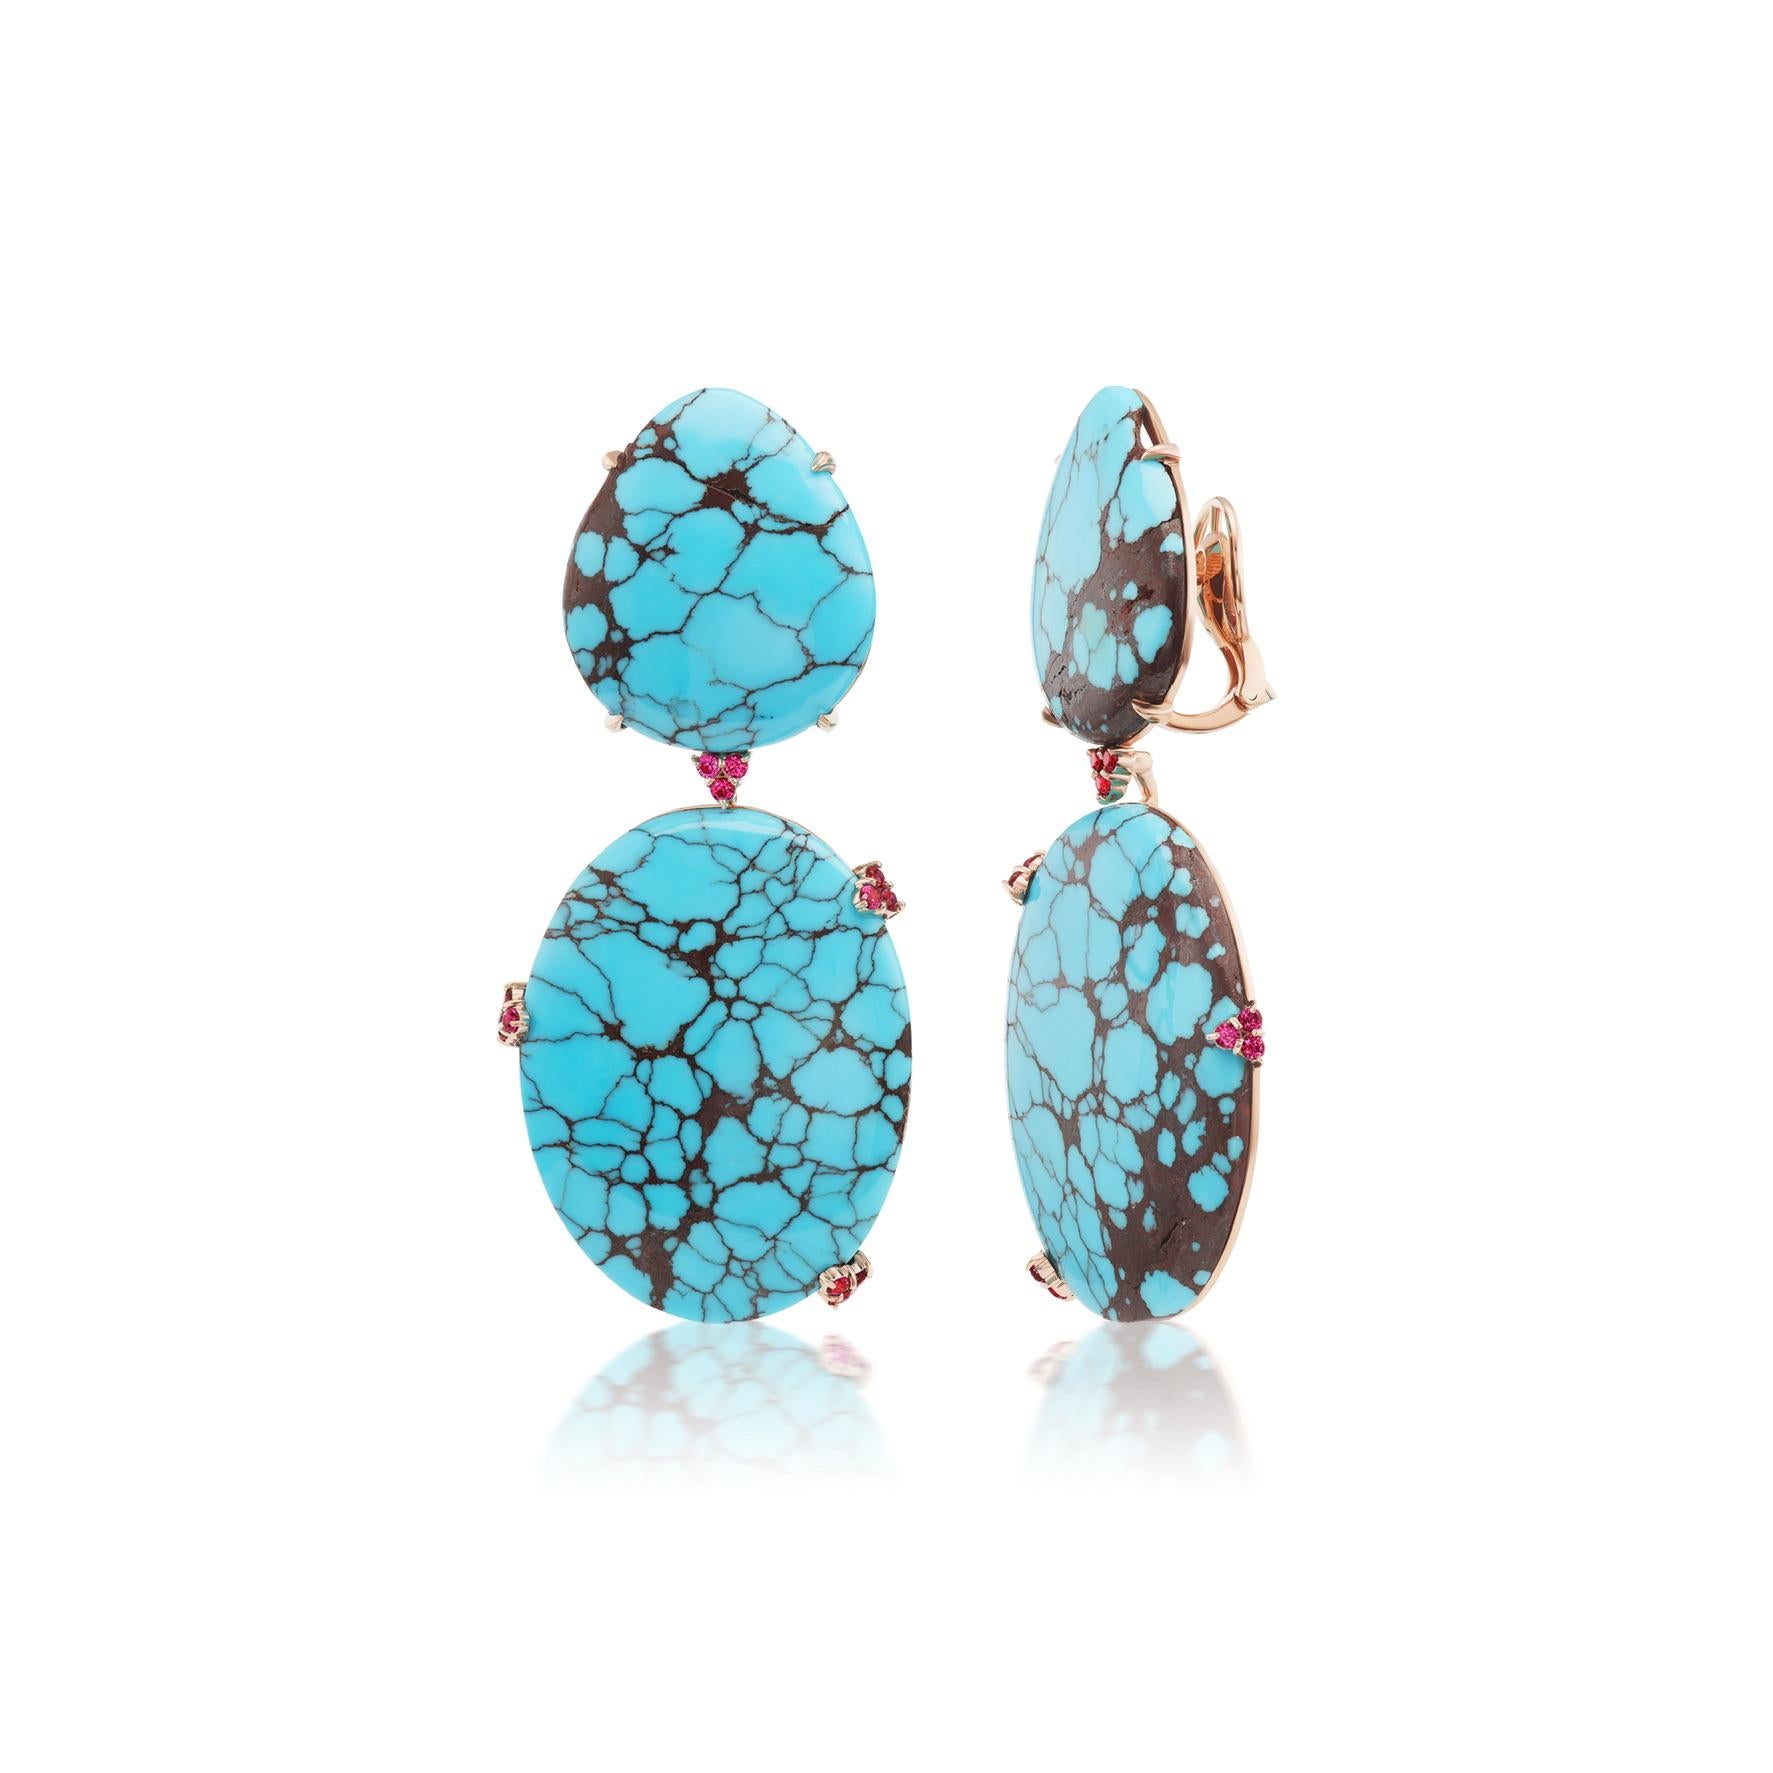 The use of turquoise in jewelry dates back thousands of years to the Egyptian Pharaohs, and through history it was prized by the Aztecs, the ancient Romans and Native Americans.  The coveted blue material forms along with other minerals within what